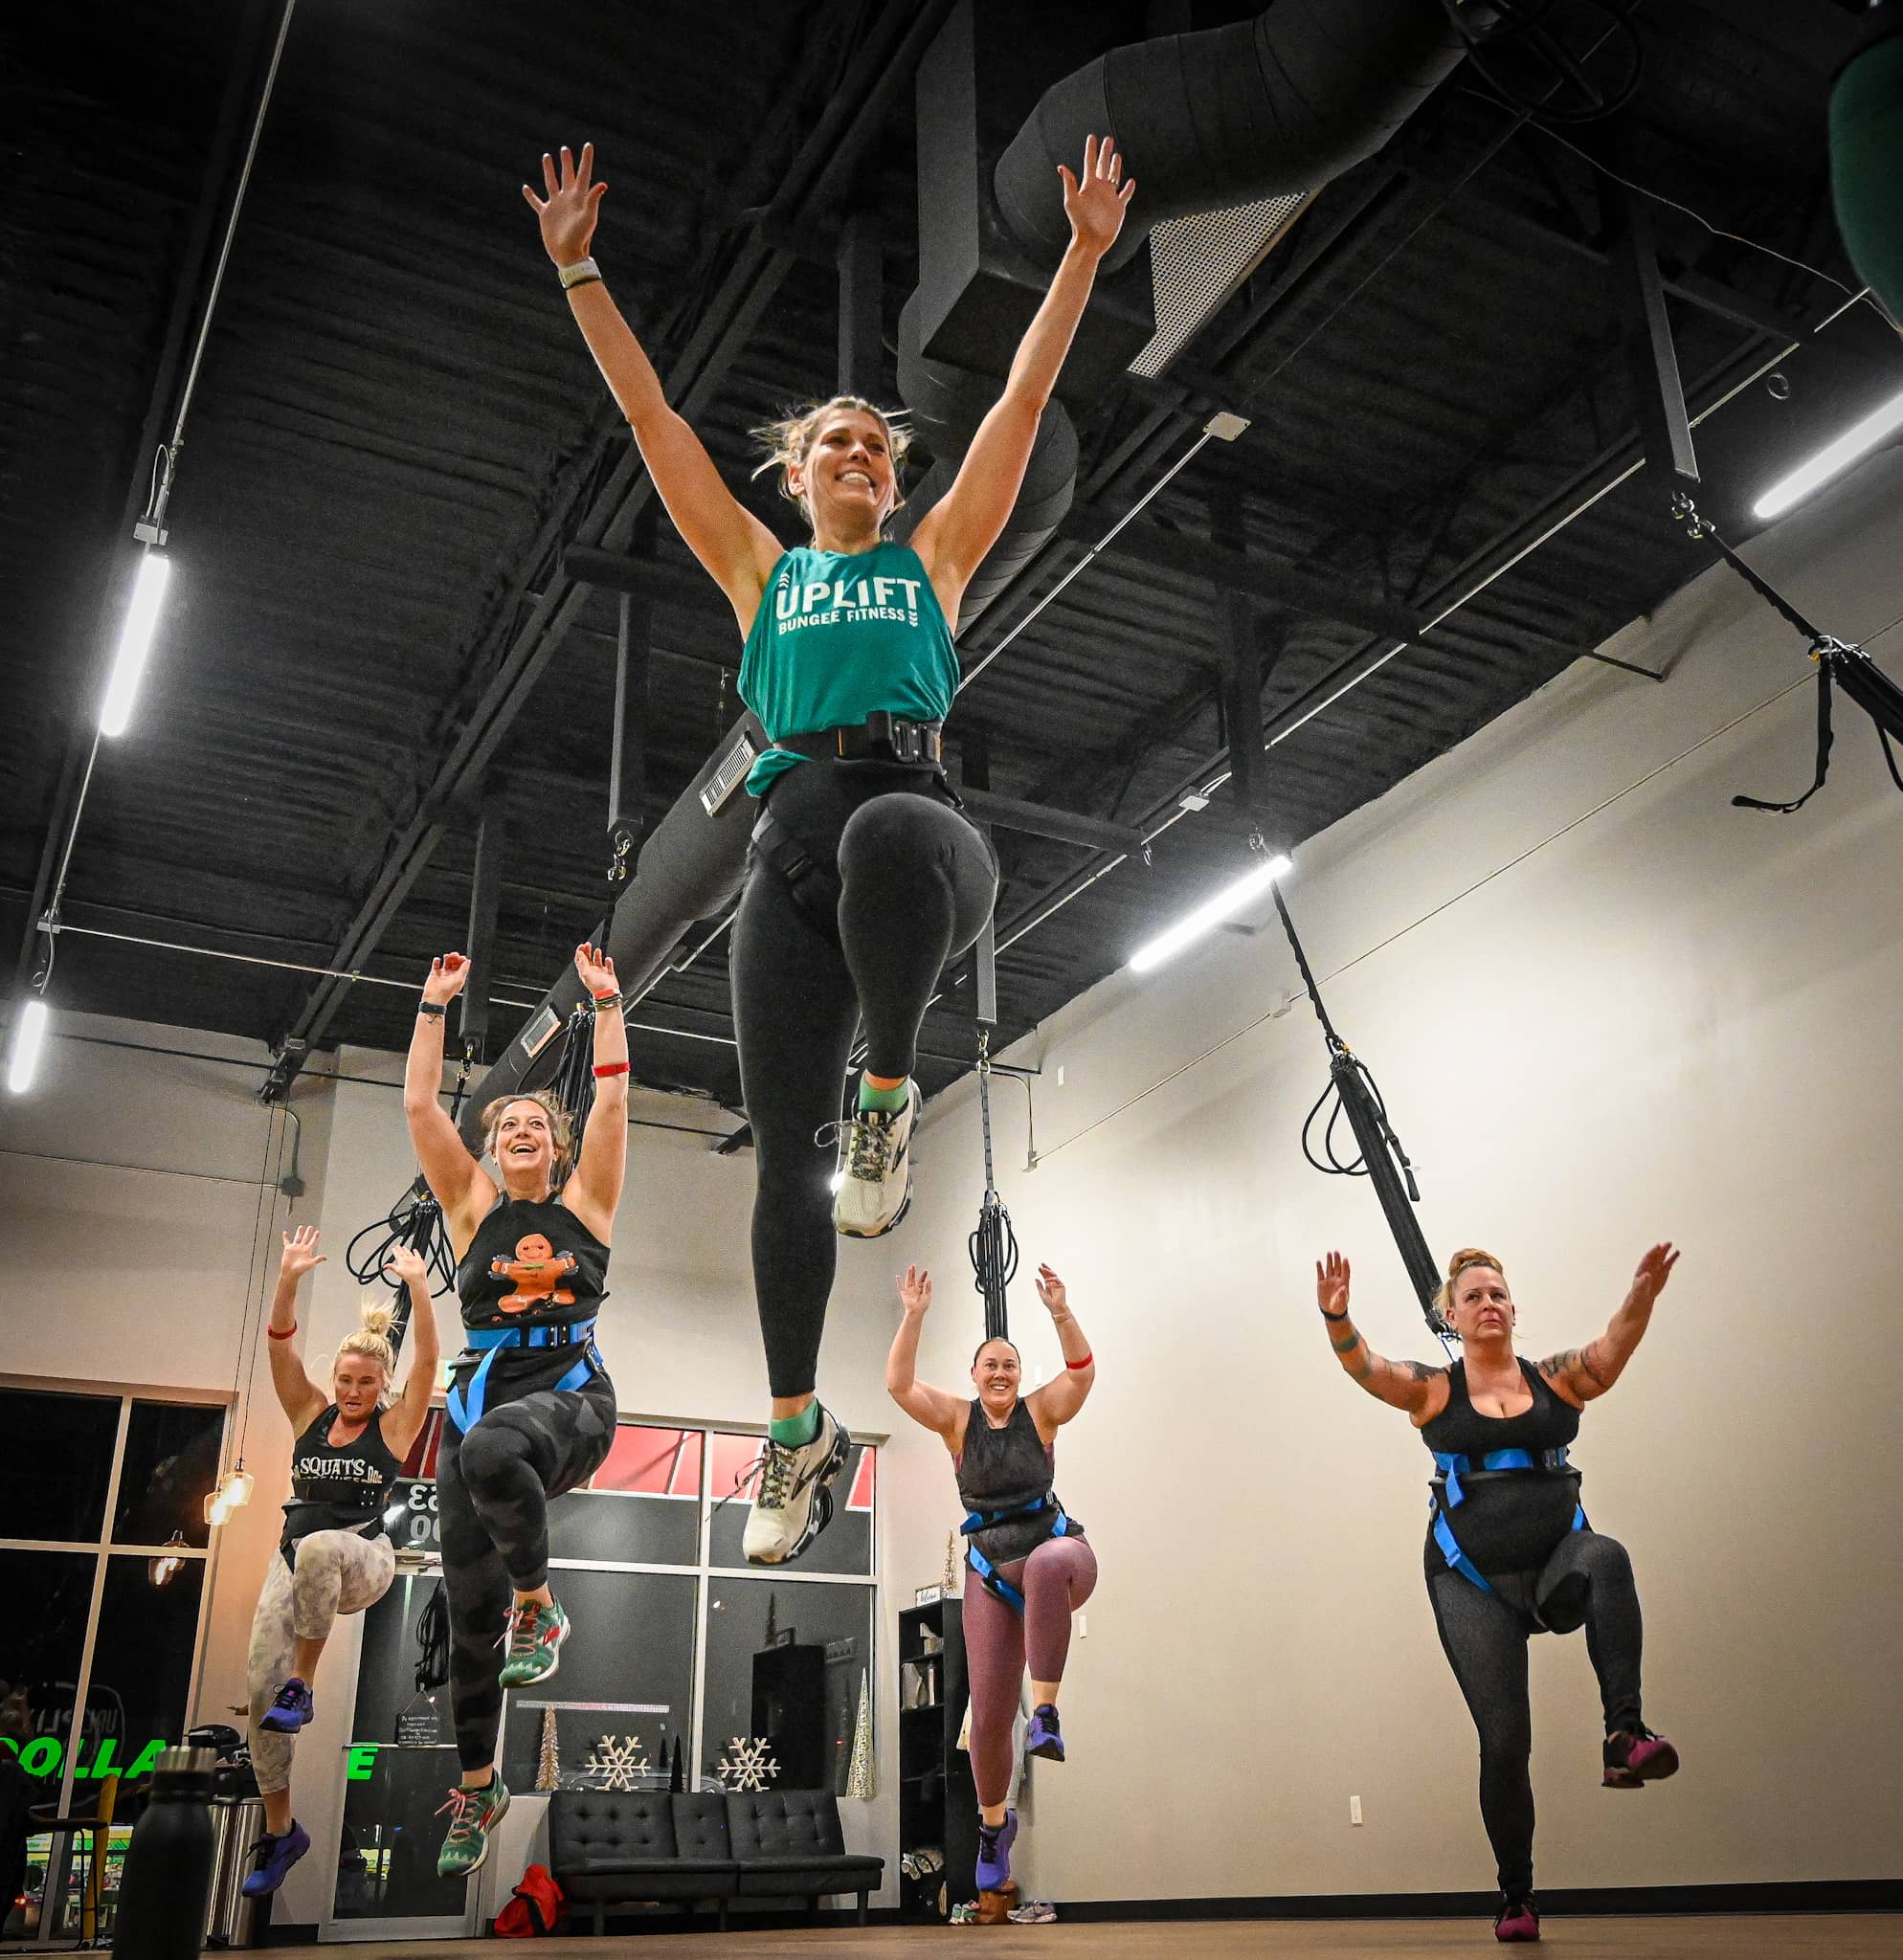 Bungee fitness arrives in Sioux Falls 